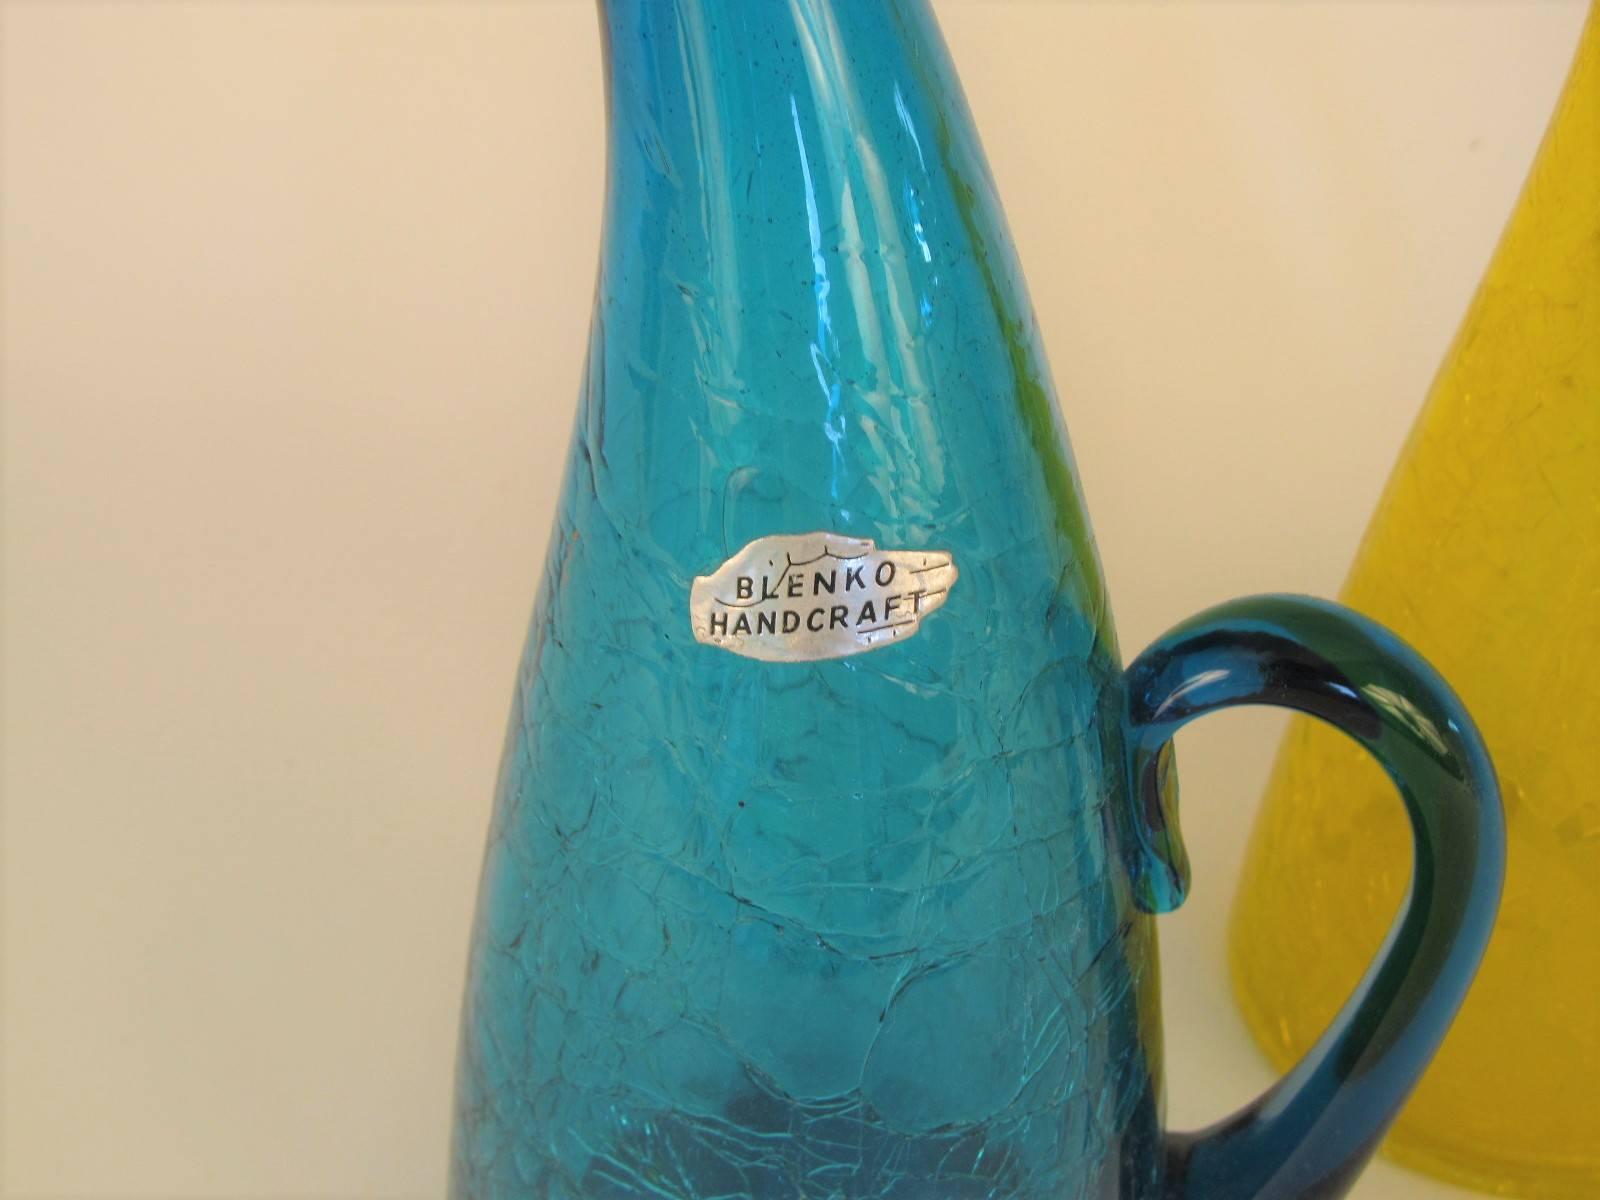 Certainly one of Winslow Andersons most recognizable and playful designs, Anderson was the head of design at Blenko from 1946-1954, and helped to establish the reputation of Blenko to be one of the country's most innovative and creative glass